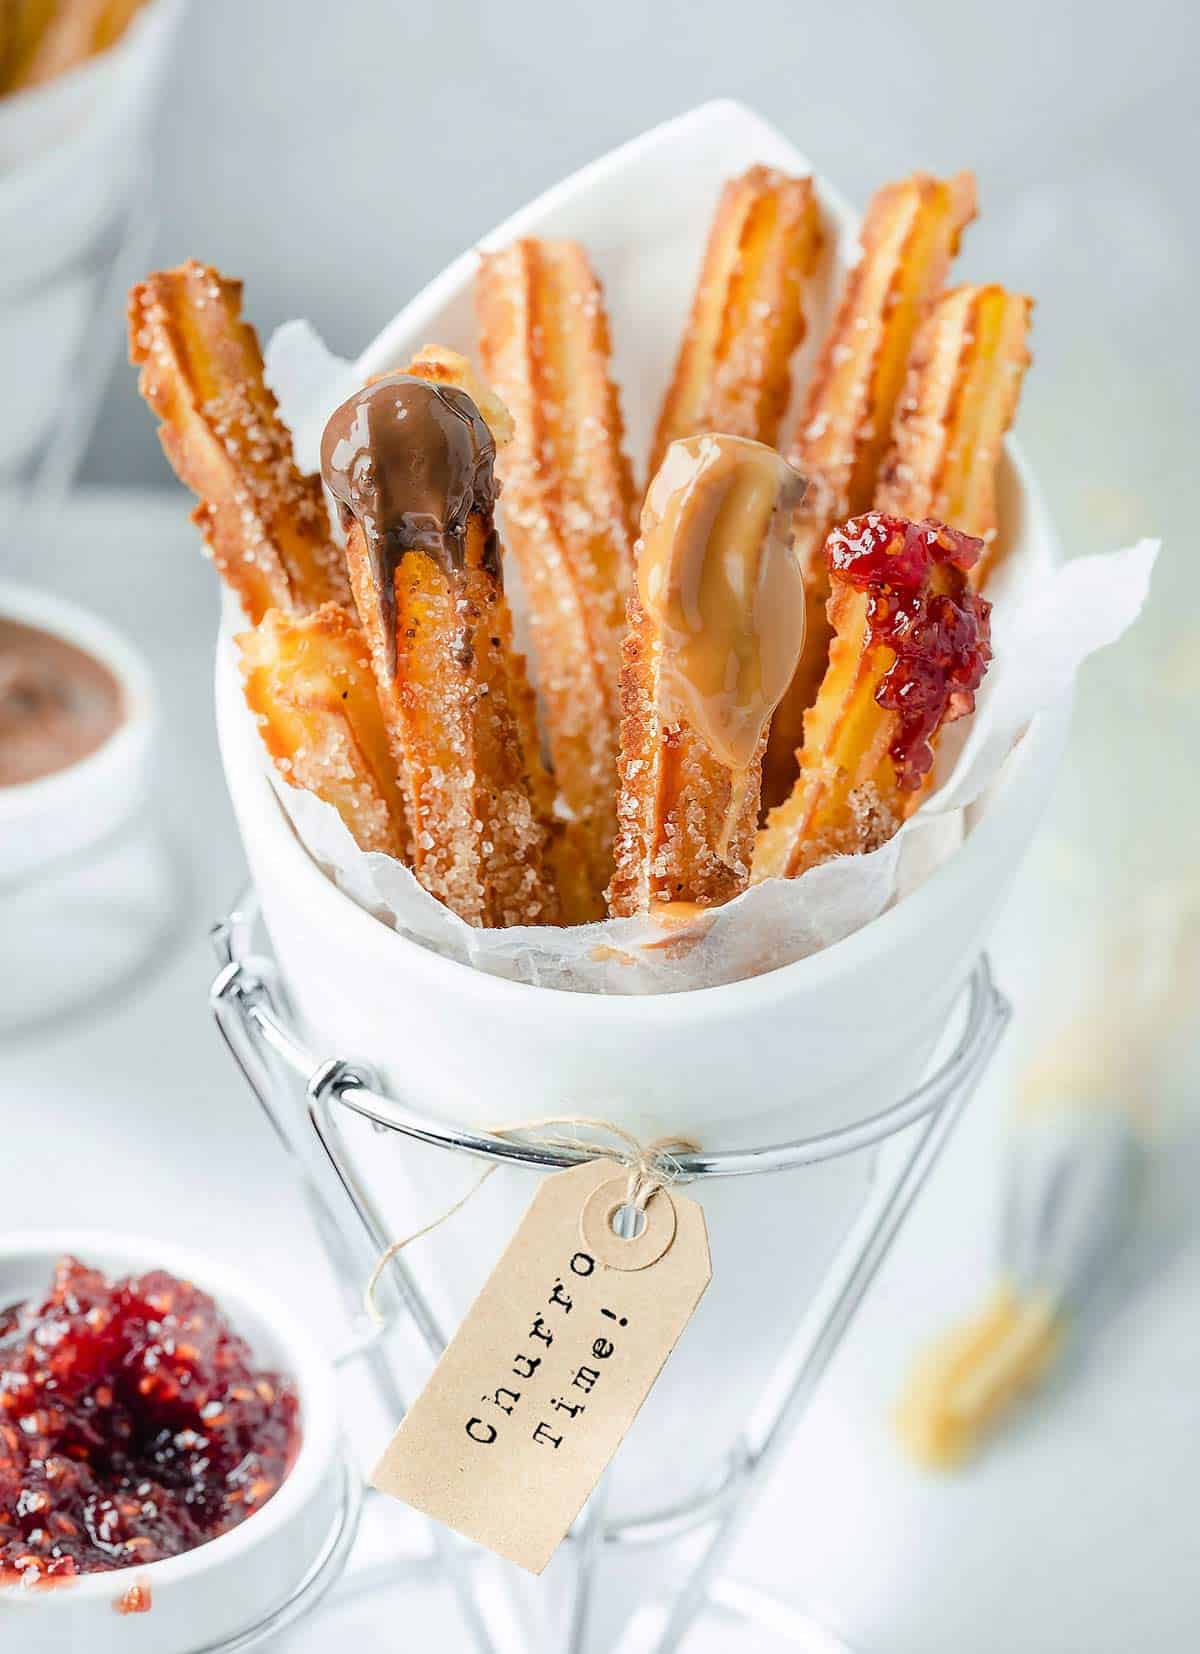 Air fryer churros in a white stand holder